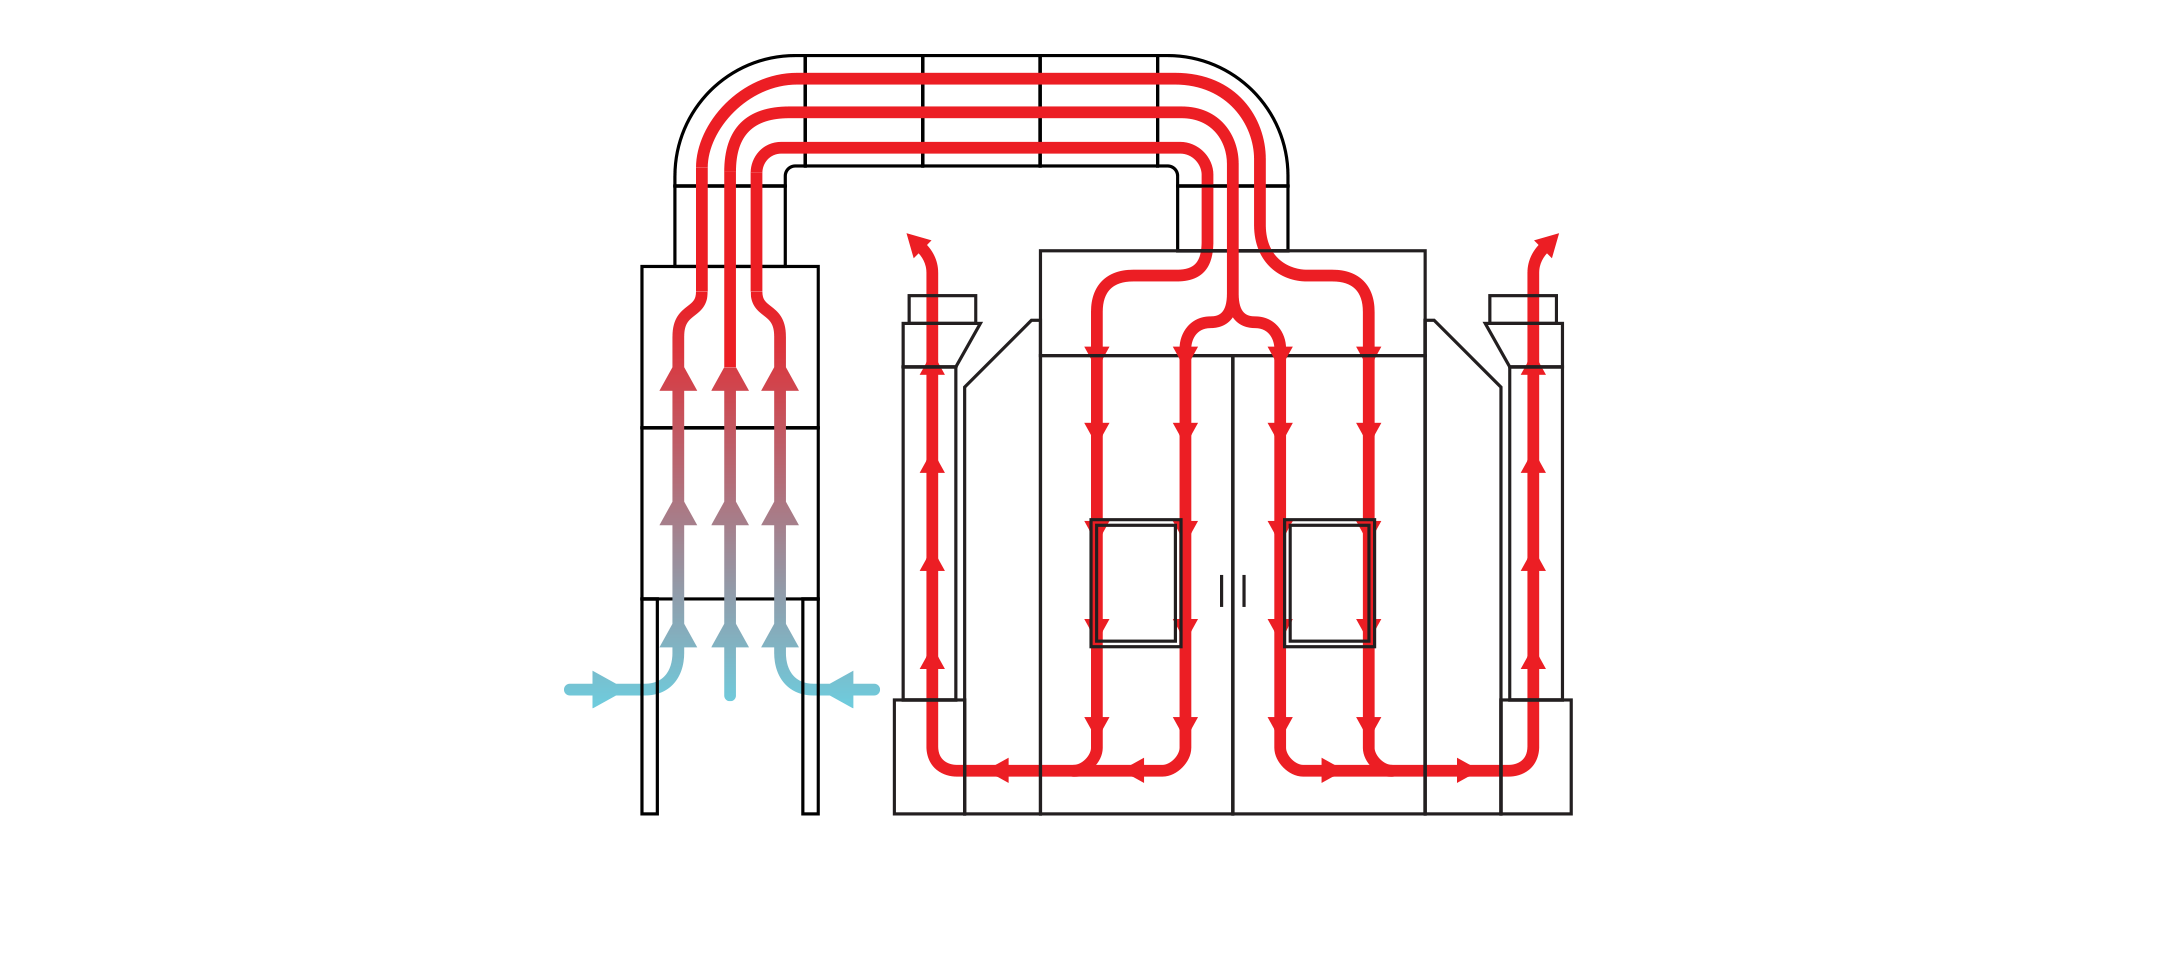 Air Flow Diagram for Heated Side Down Draft